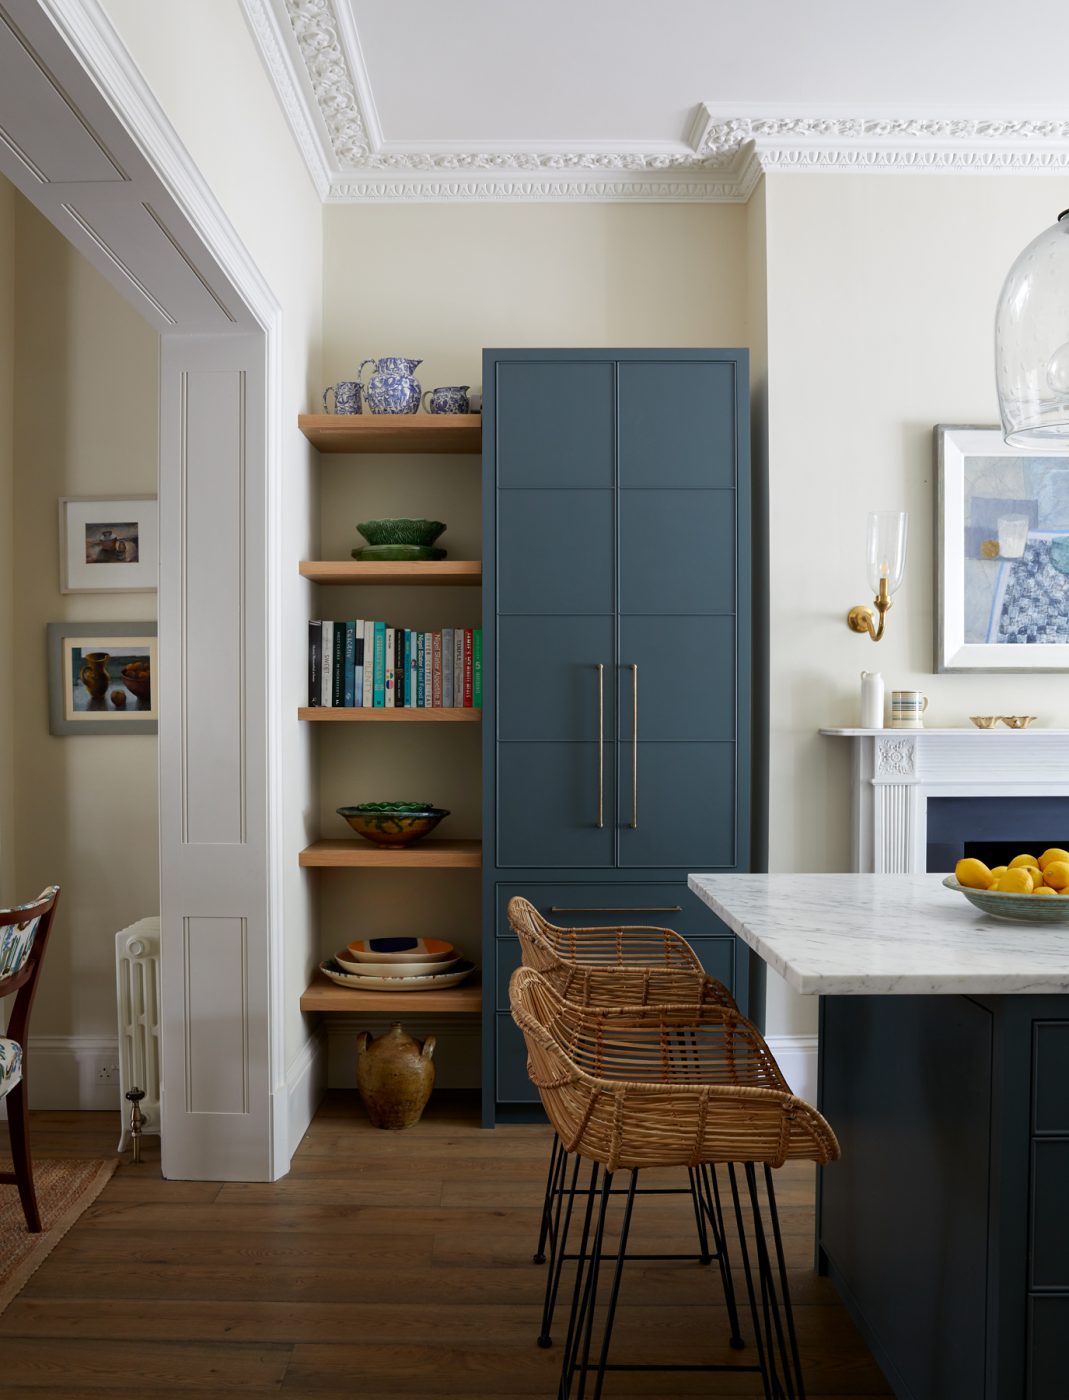 Notting Hill kitchen designed by Todhunter Earle